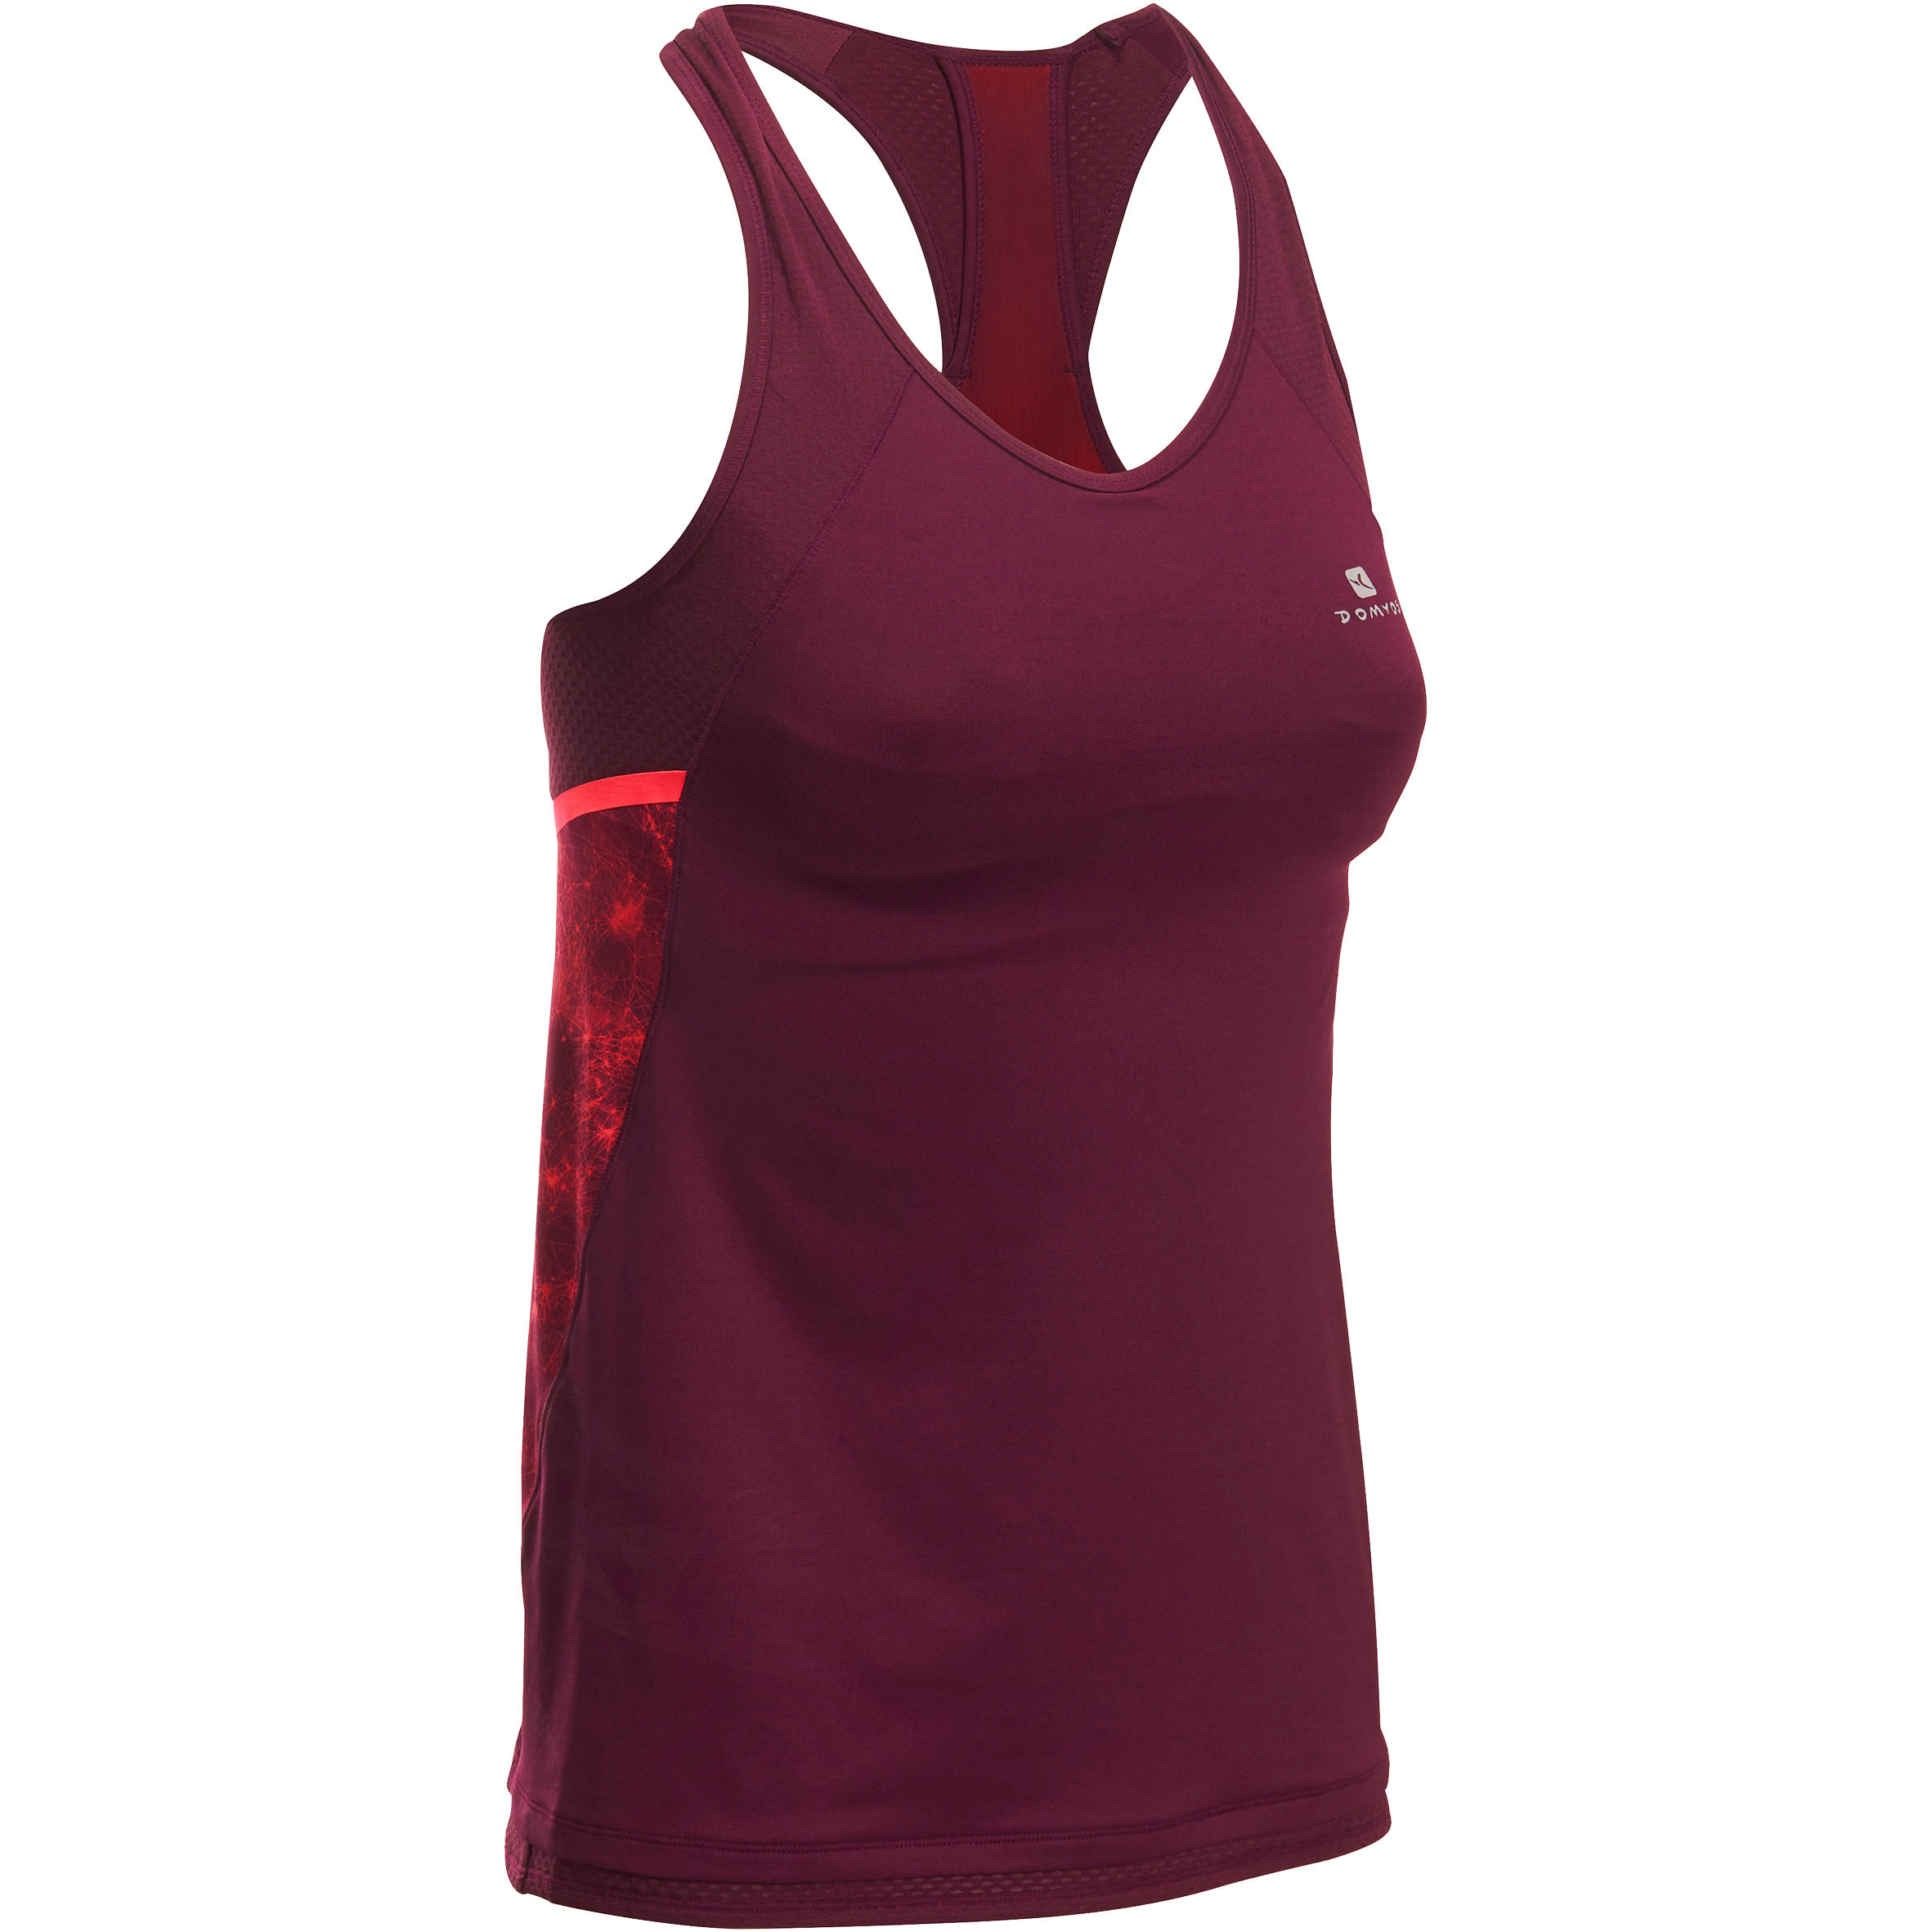 DOMYOS Energy Xtreme Women's Fitness Tank Top with Built-in Bra - Purple